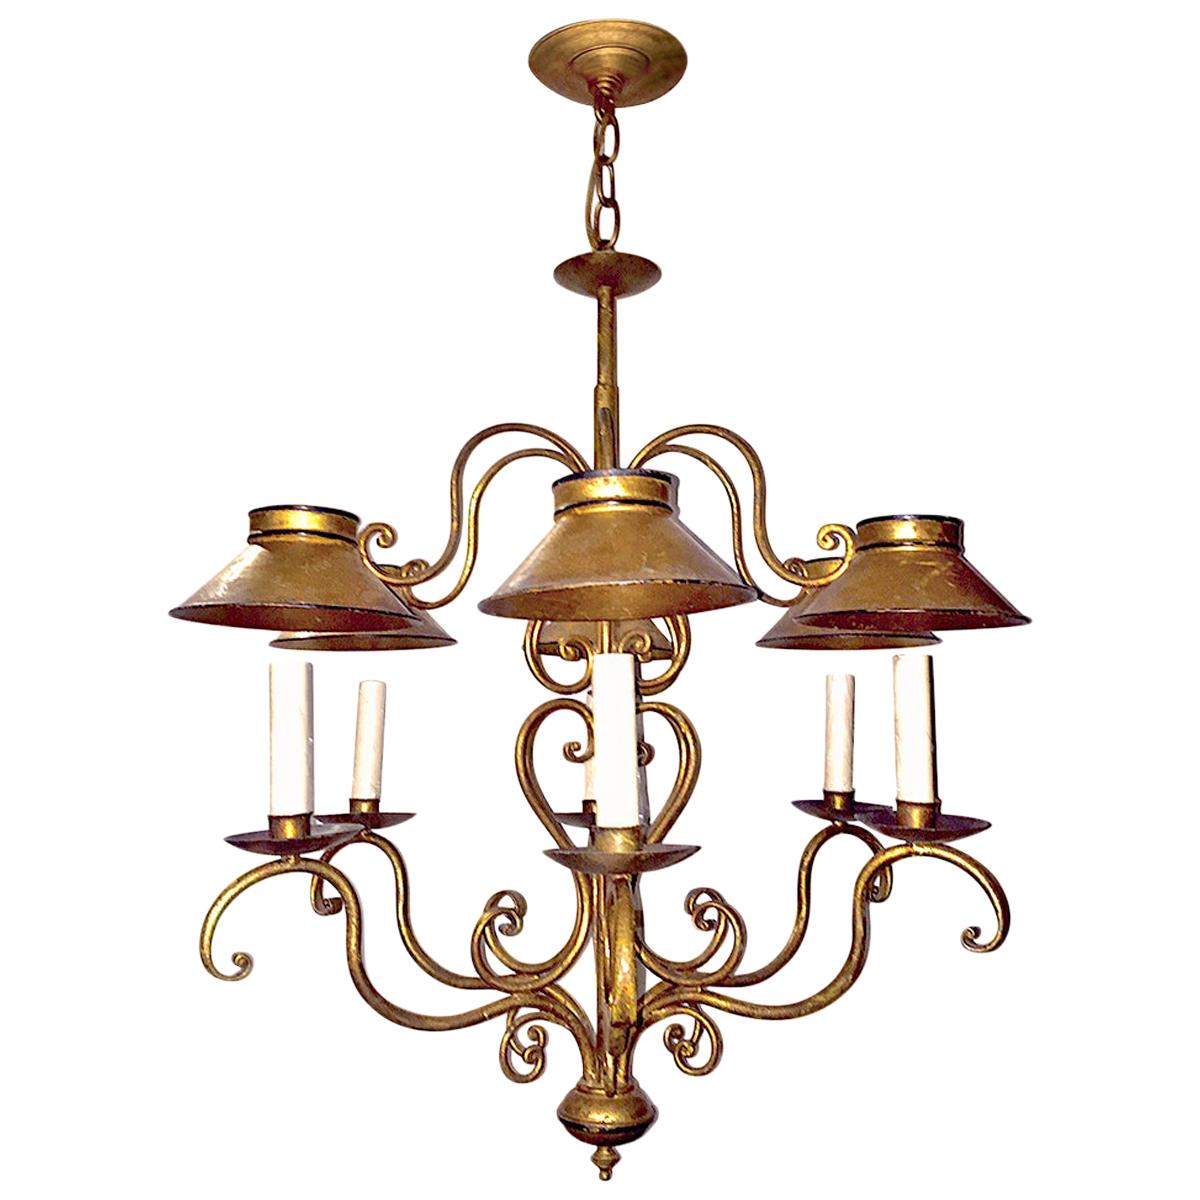 Gilt Italian Tole Chandelier with Shades For Sale